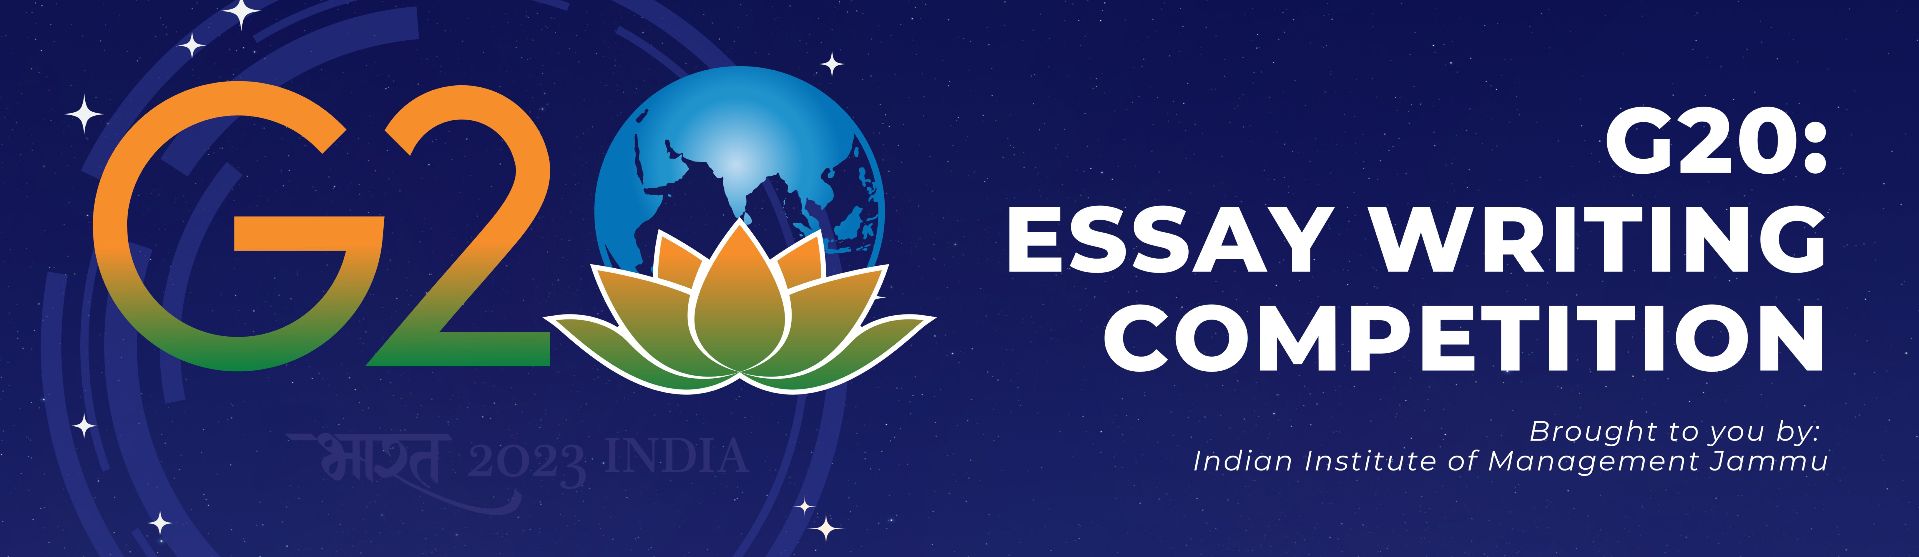 Participate in the G20: Essay Writing Competition before 27 Aug 23, 05:00 AM CUT